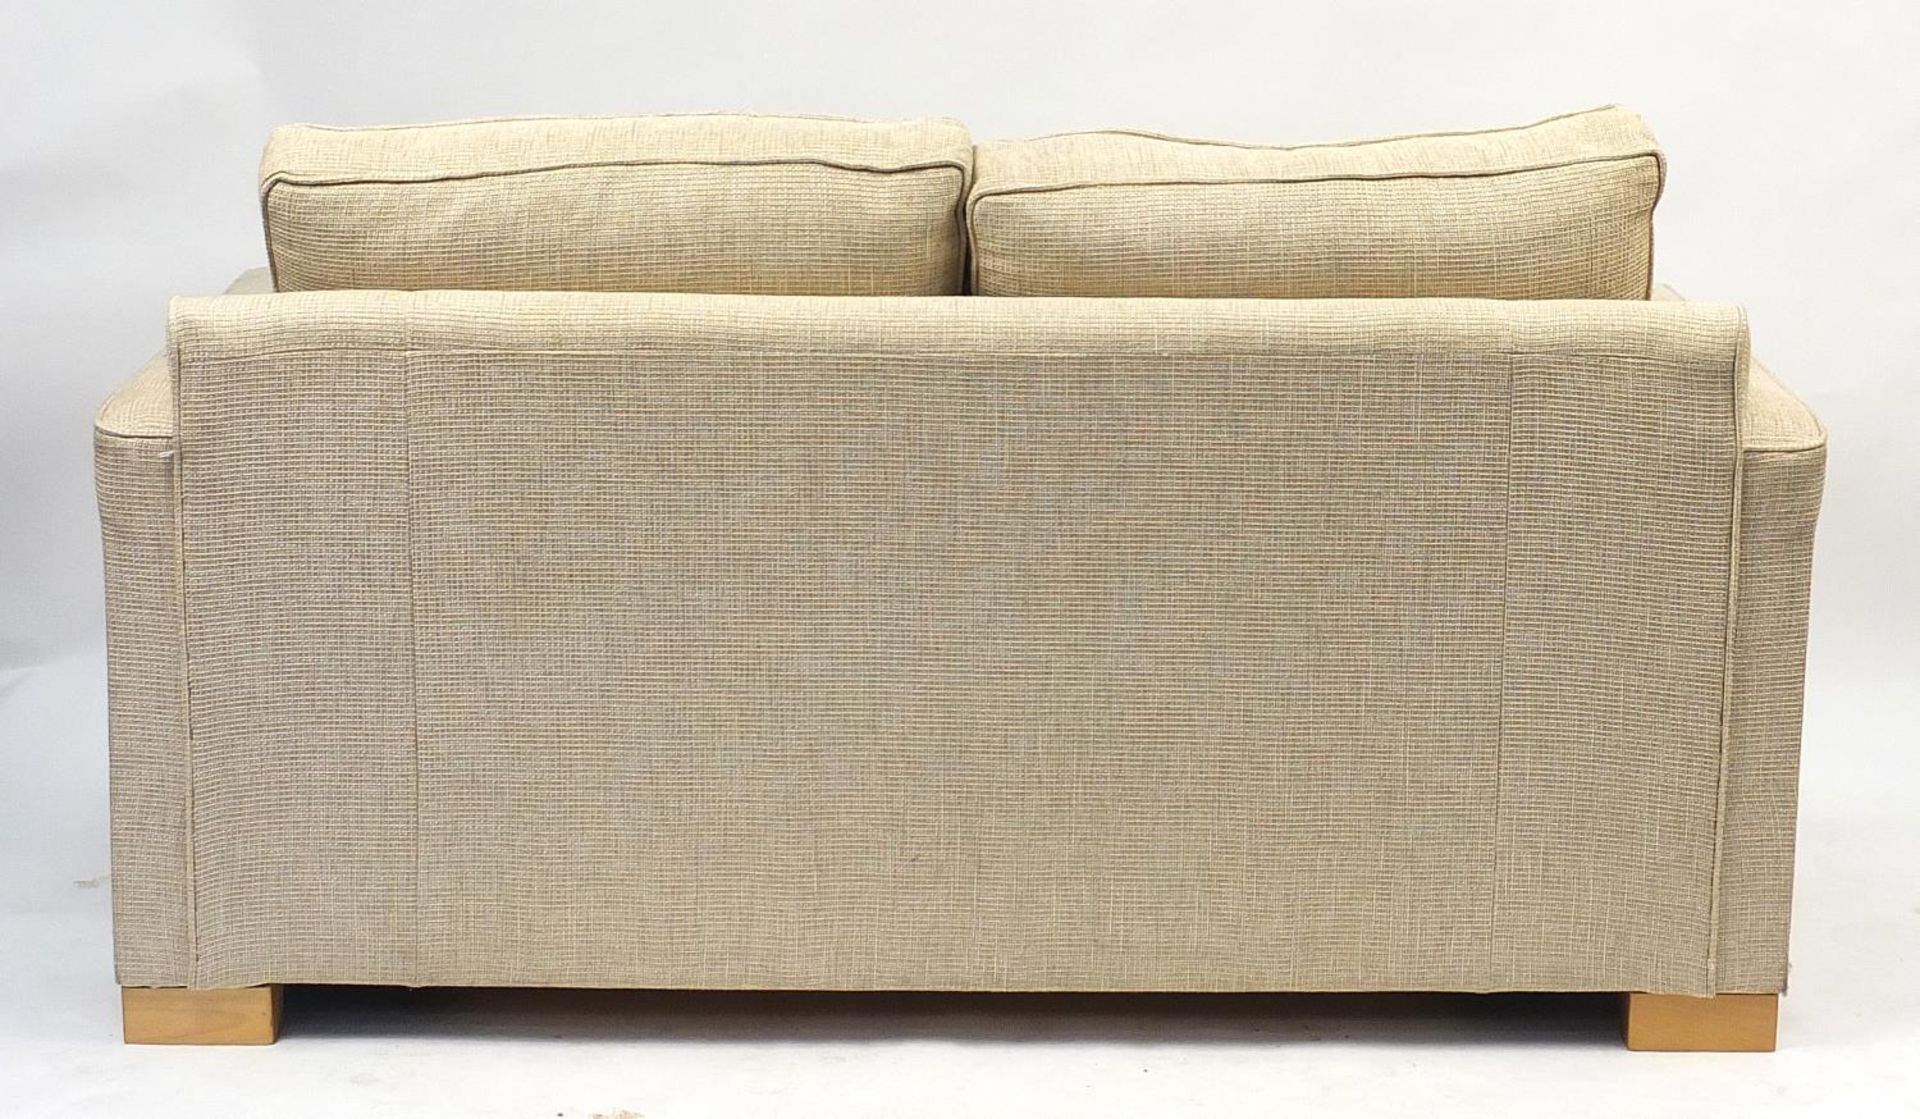 Contemporary beige upholstered sofa bed, 166cm wide - Image 4 of 4